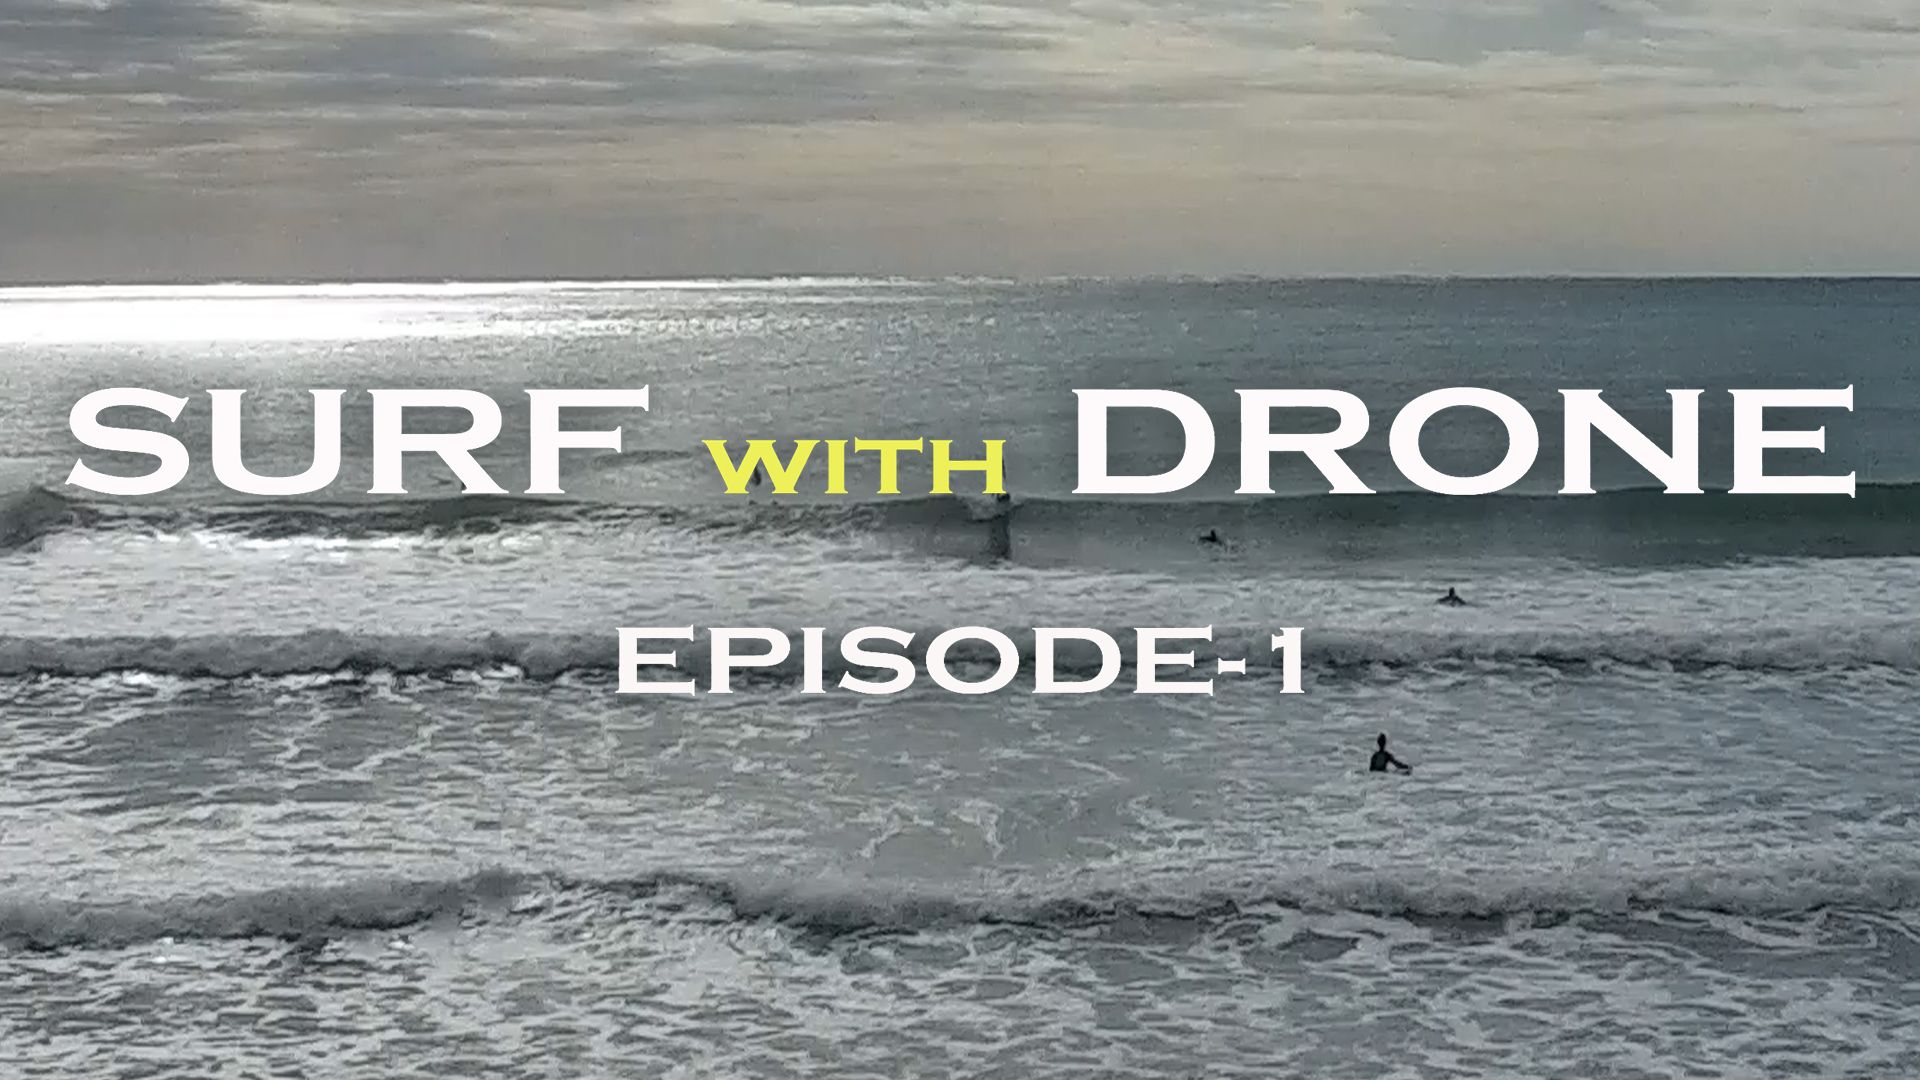 SURF WITH DRONE EPISODE-1